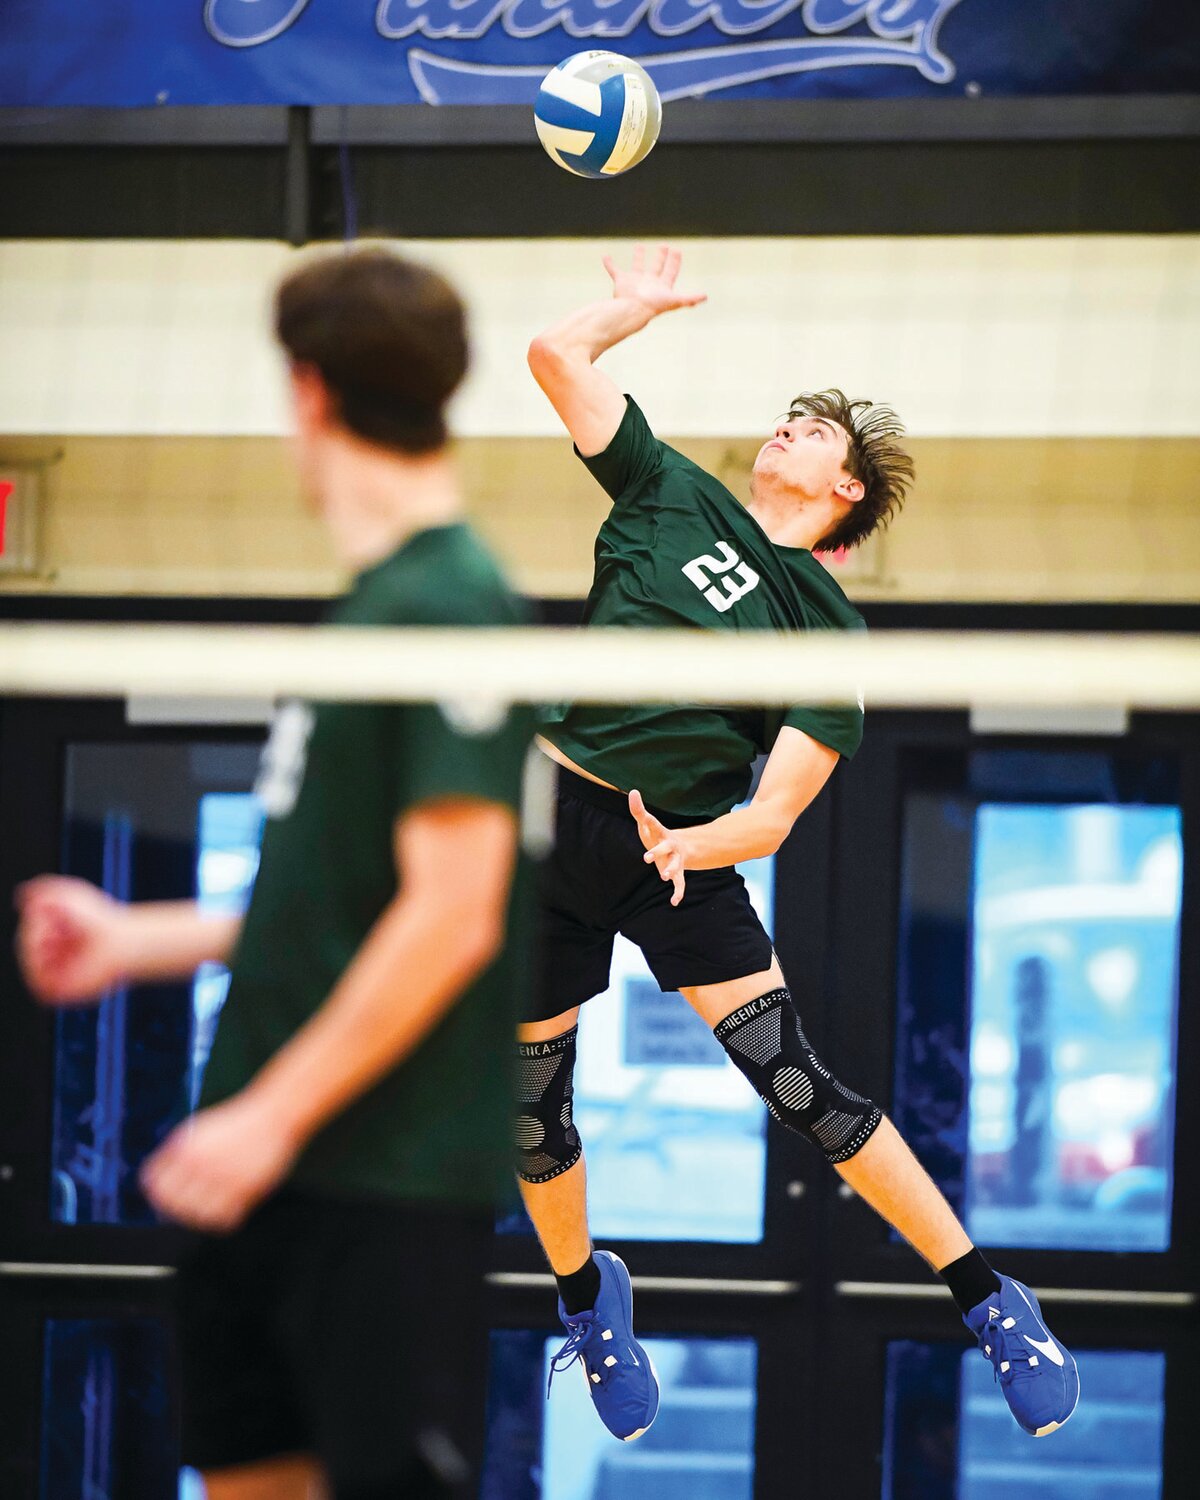 Pennridge’s Aaron Ladd serving during the first game.